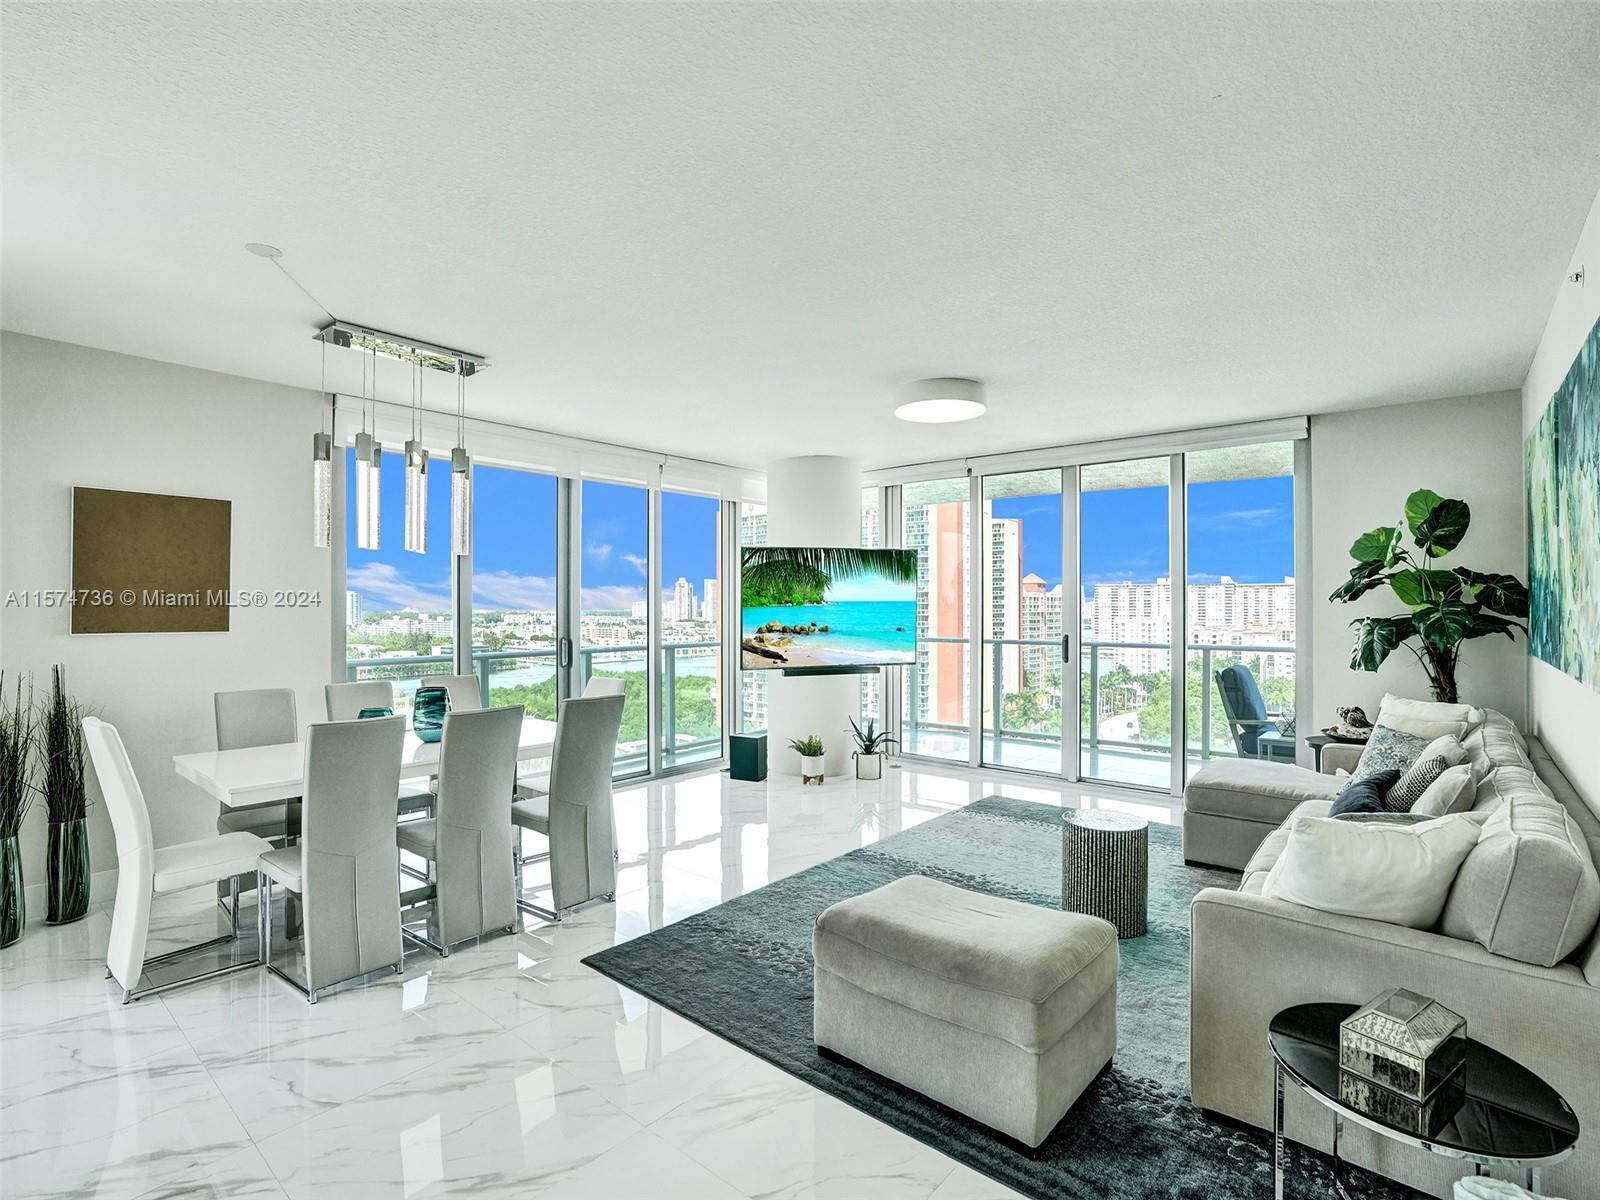 Located in Sunny Isles Beach one of the most beautiful areas in Miami, walking distance from the bea